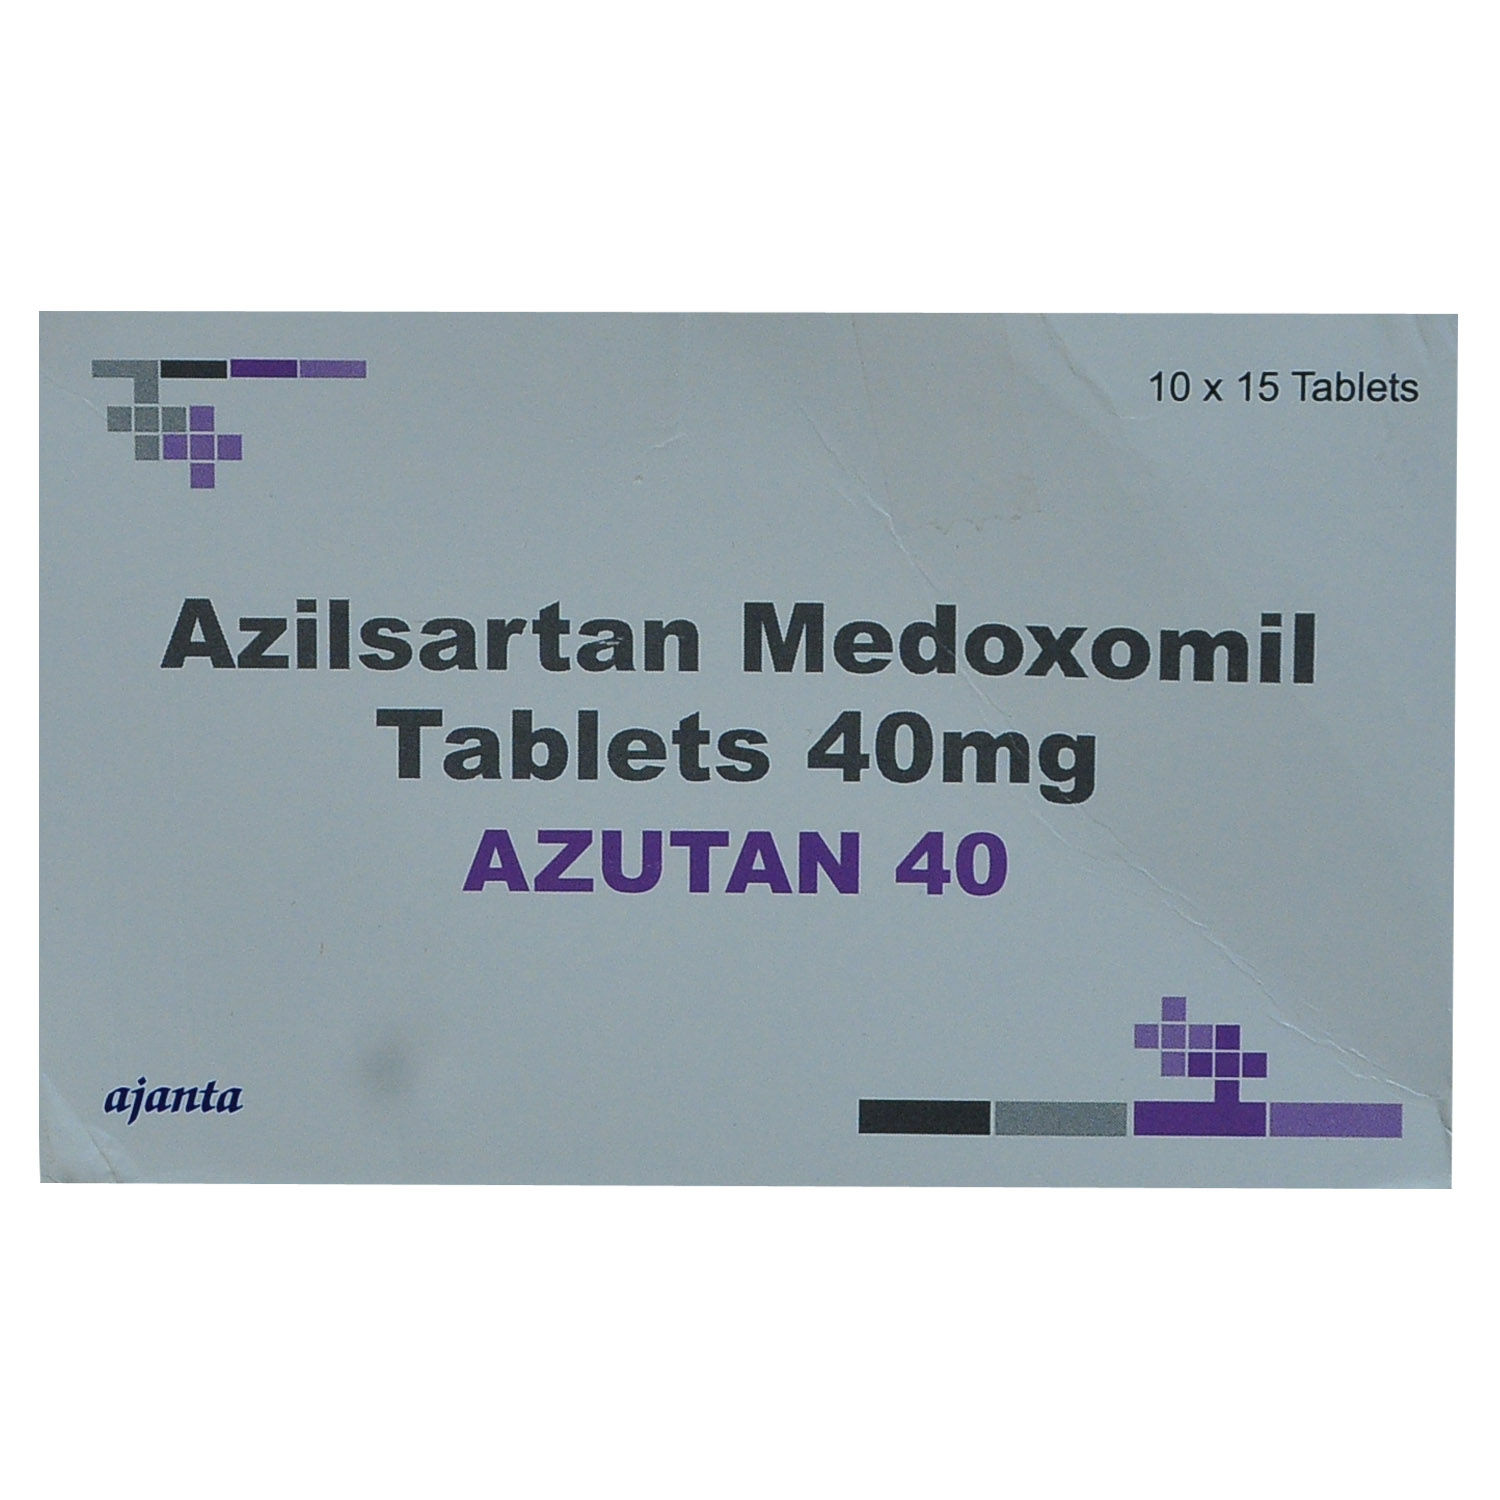 Azutan 40 Tablet 15's, Pack of 15 TABLETS